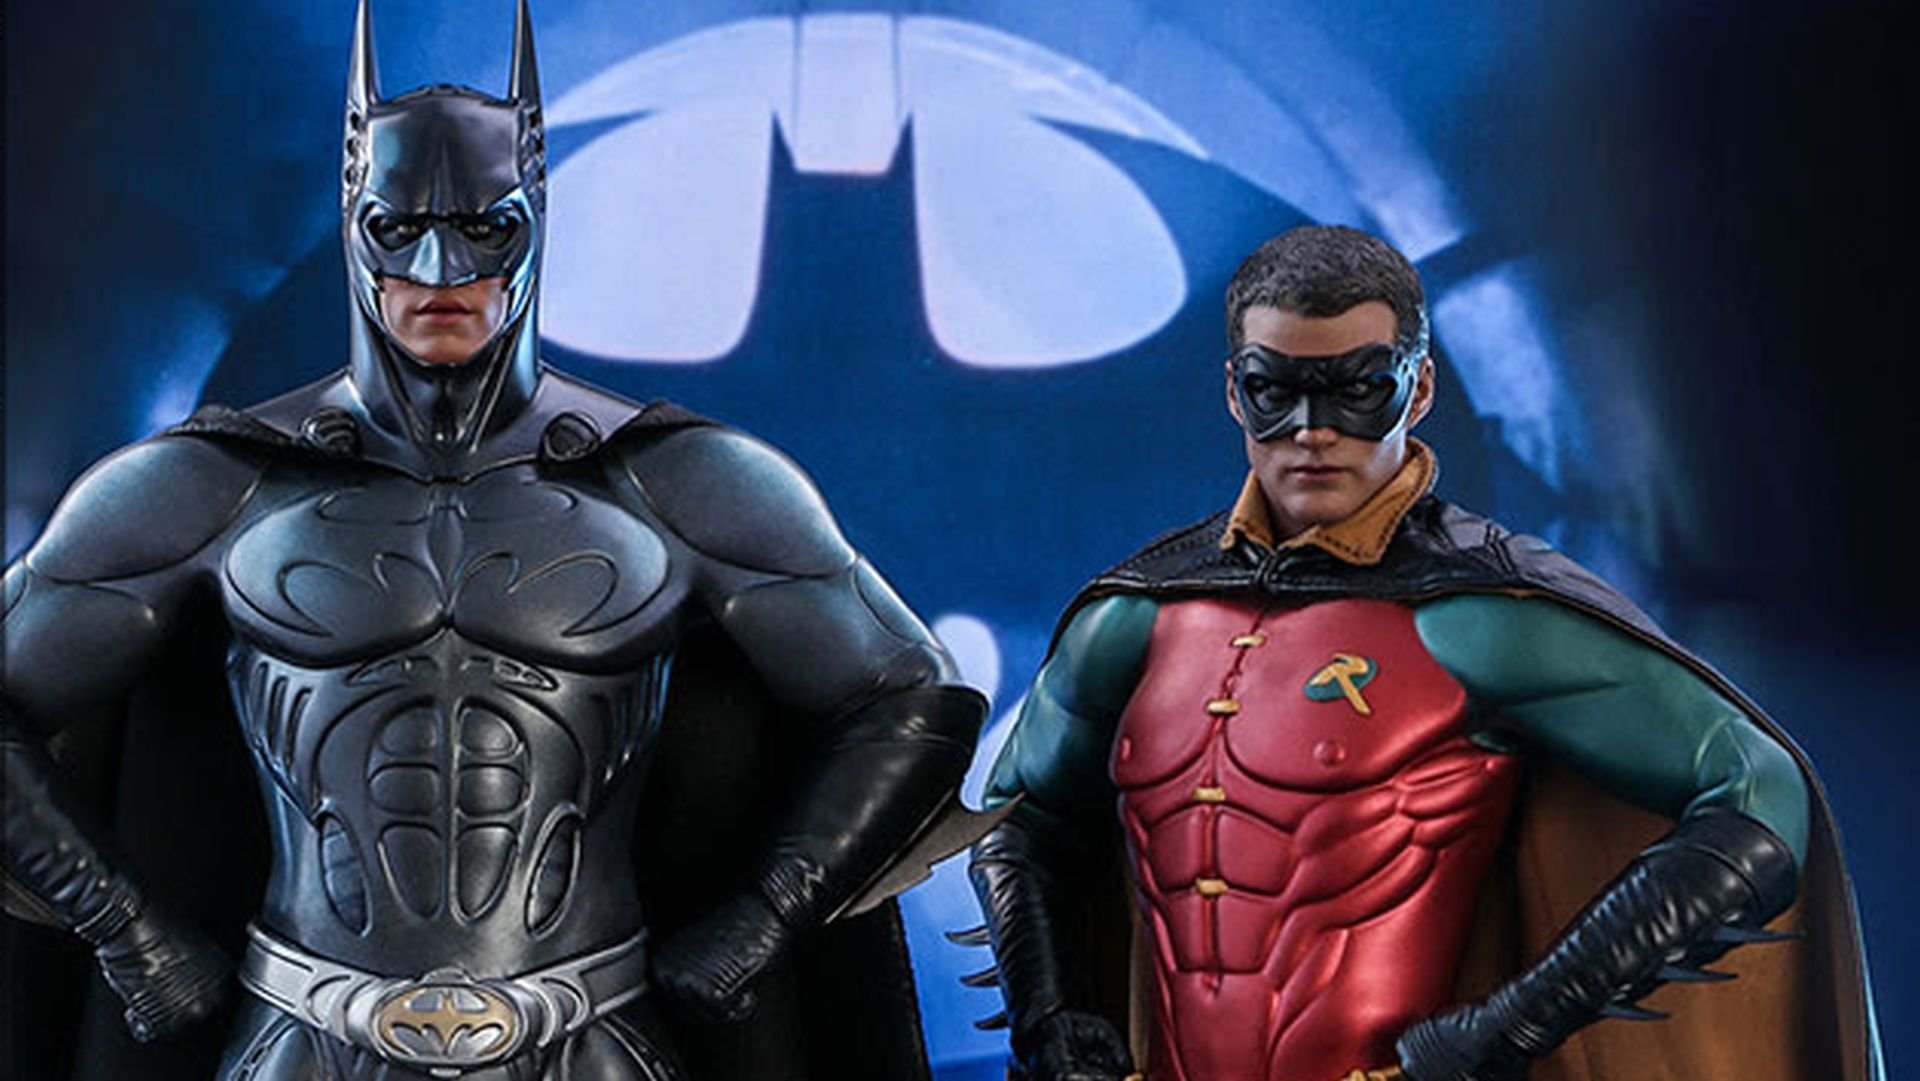 Holy Unboxing Videos Batman! Sideshow Unboxes New Batman And Robin  Collectibles — GeekTyrant